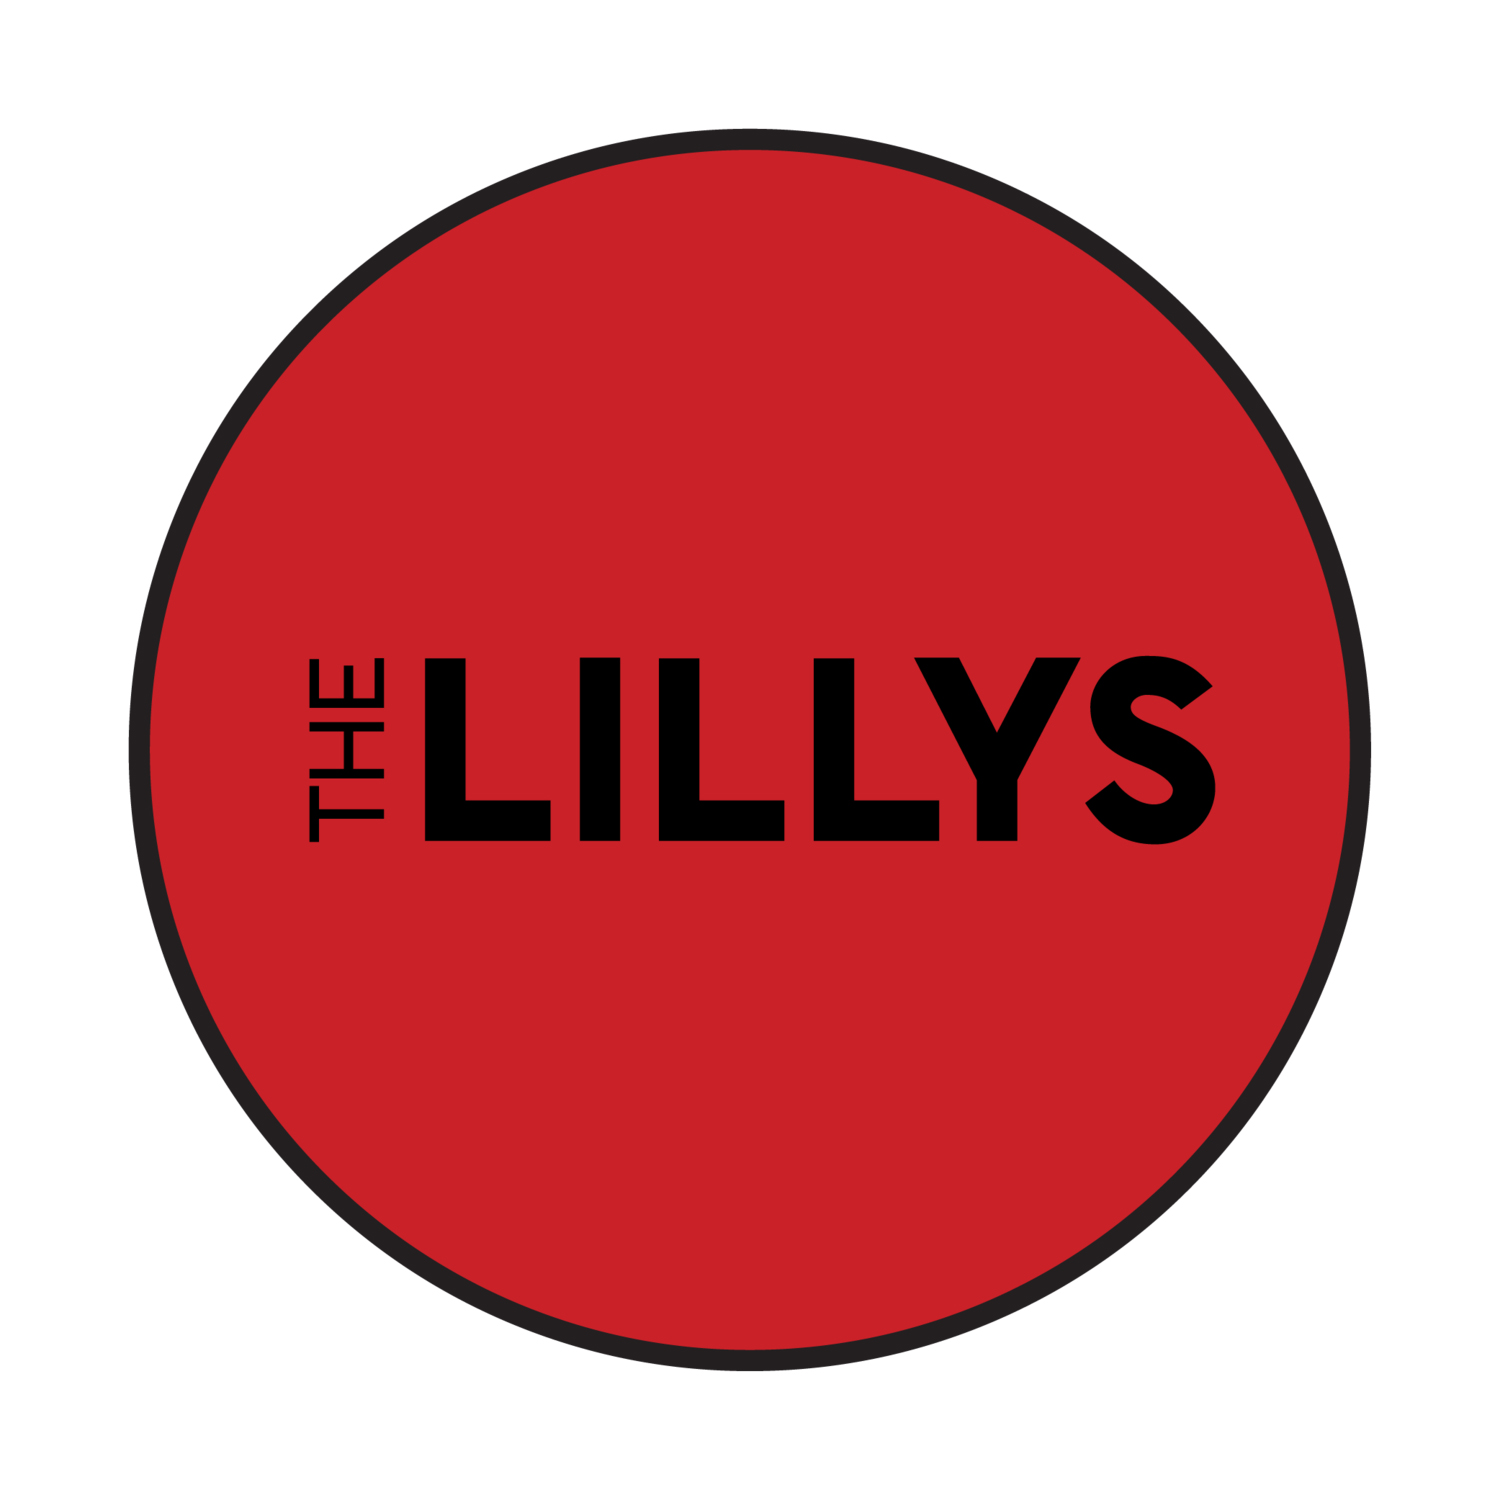 The Lillys